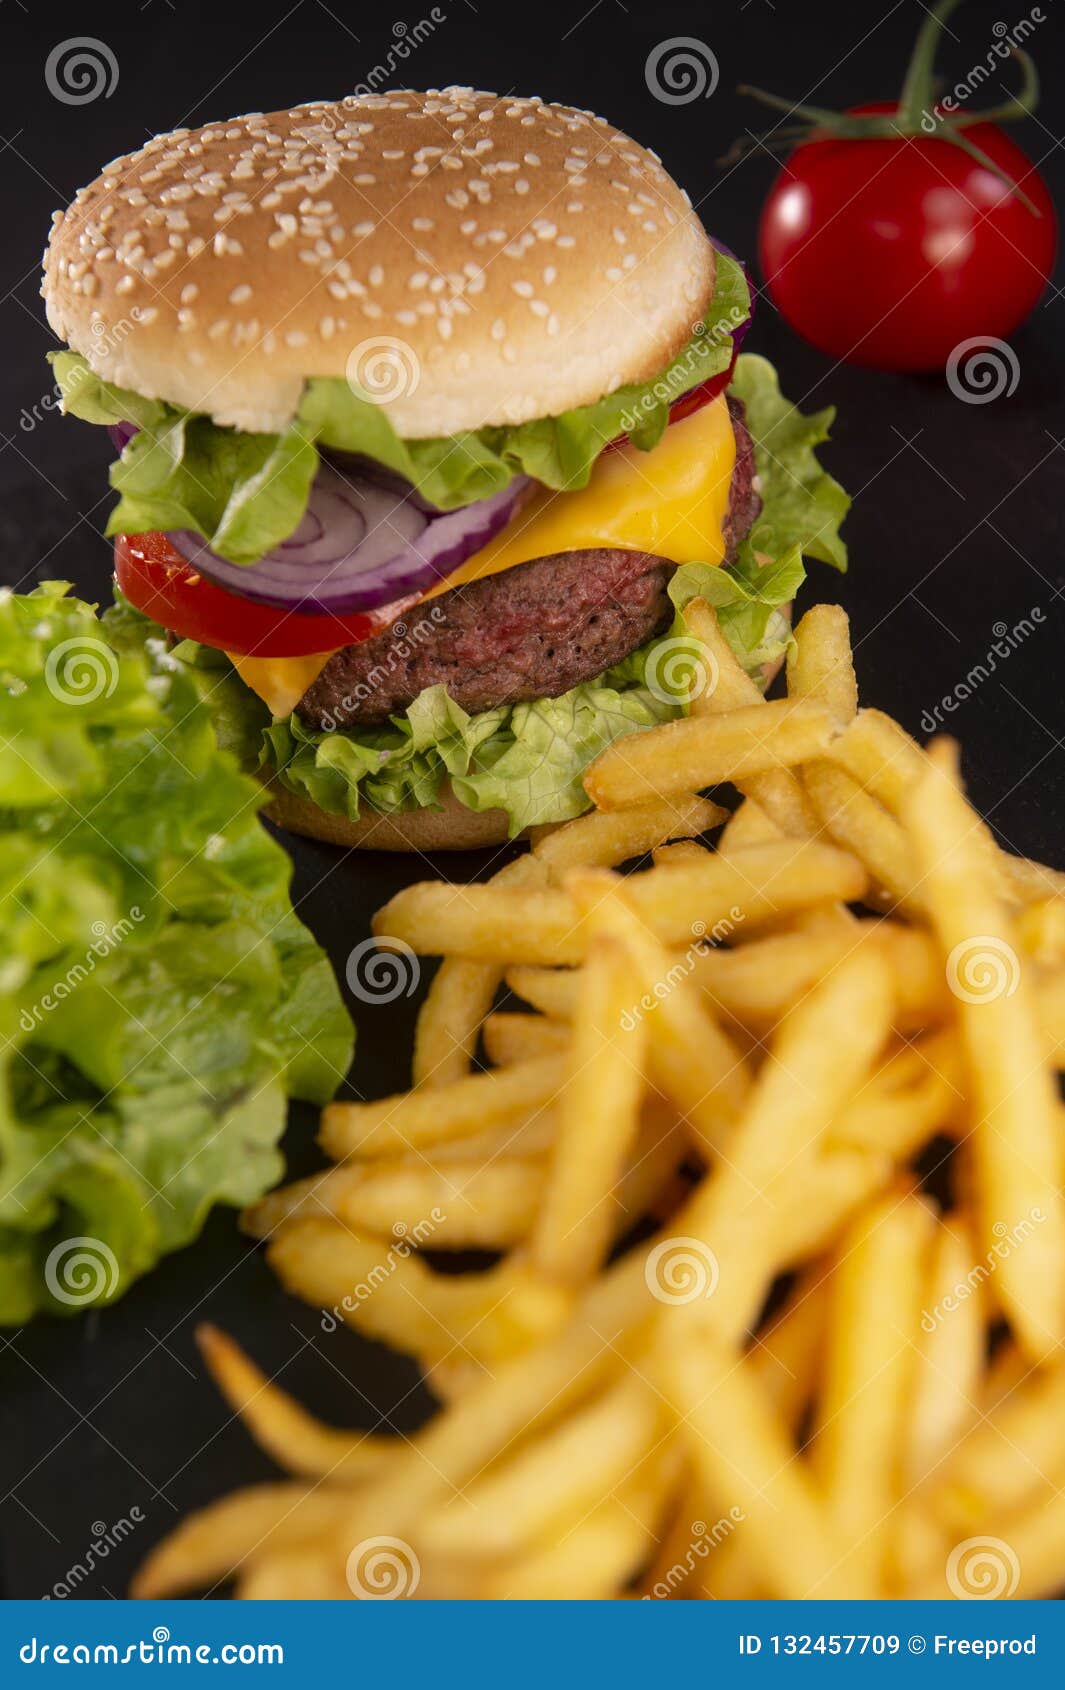 Burger With French Fries Cutlet With Cheese And Tomato Stock Image